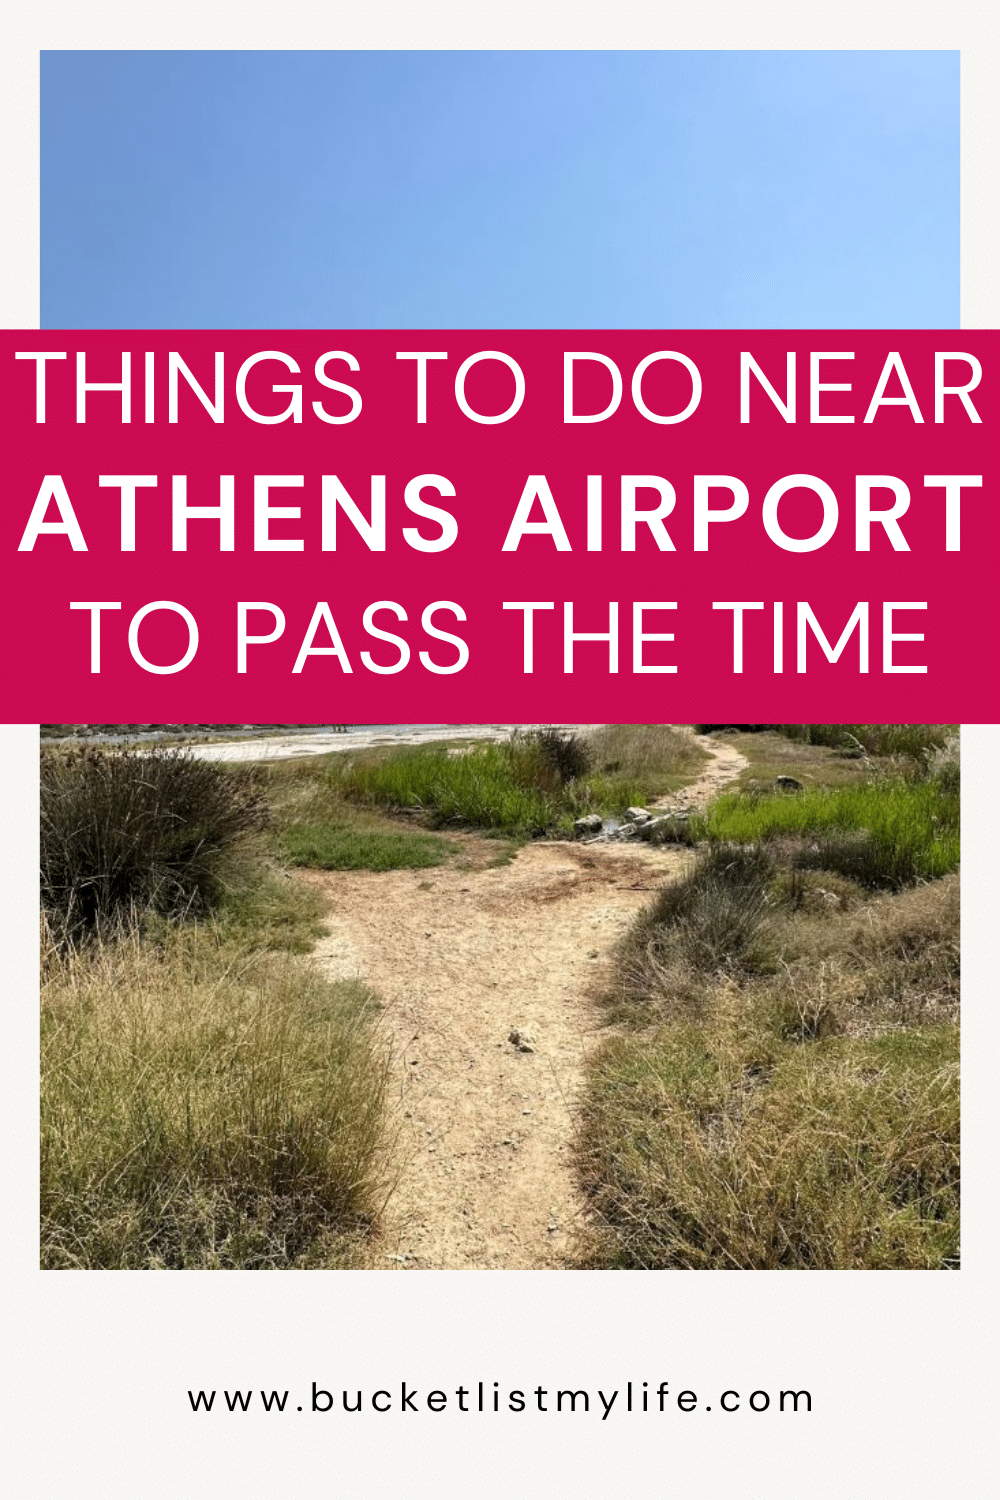 Things to Do Near Athens Airport: Best Layover Ideas